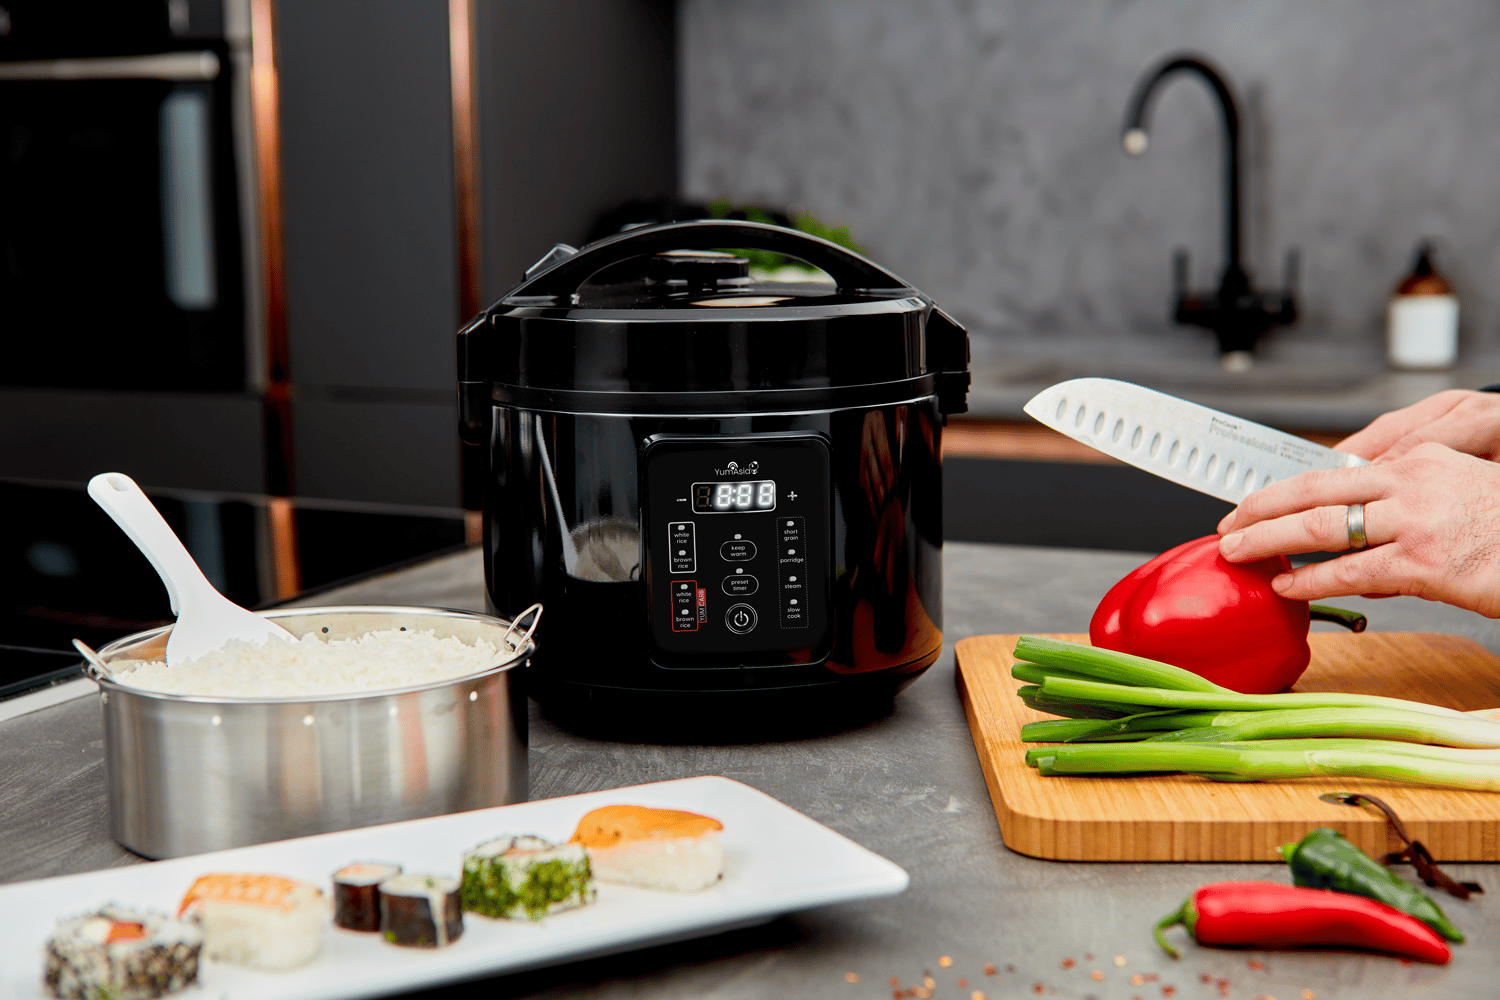 Rice cooker displays and countdowns - GreedyPanda Foodie Blog